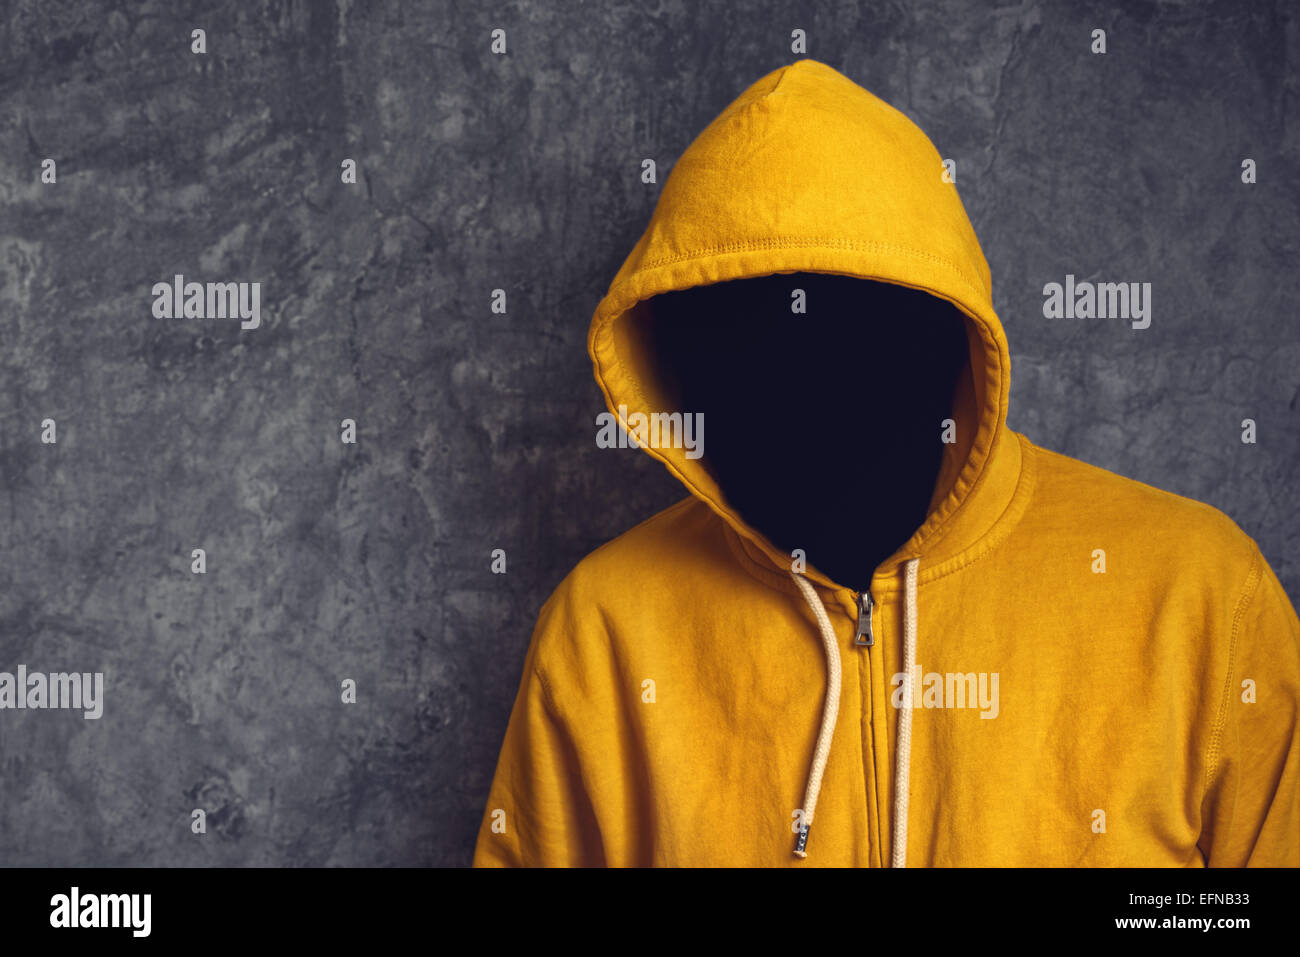 Faceless unknown and unrecognizable person without identity wearing yellow hooded jacket. Stock Photo